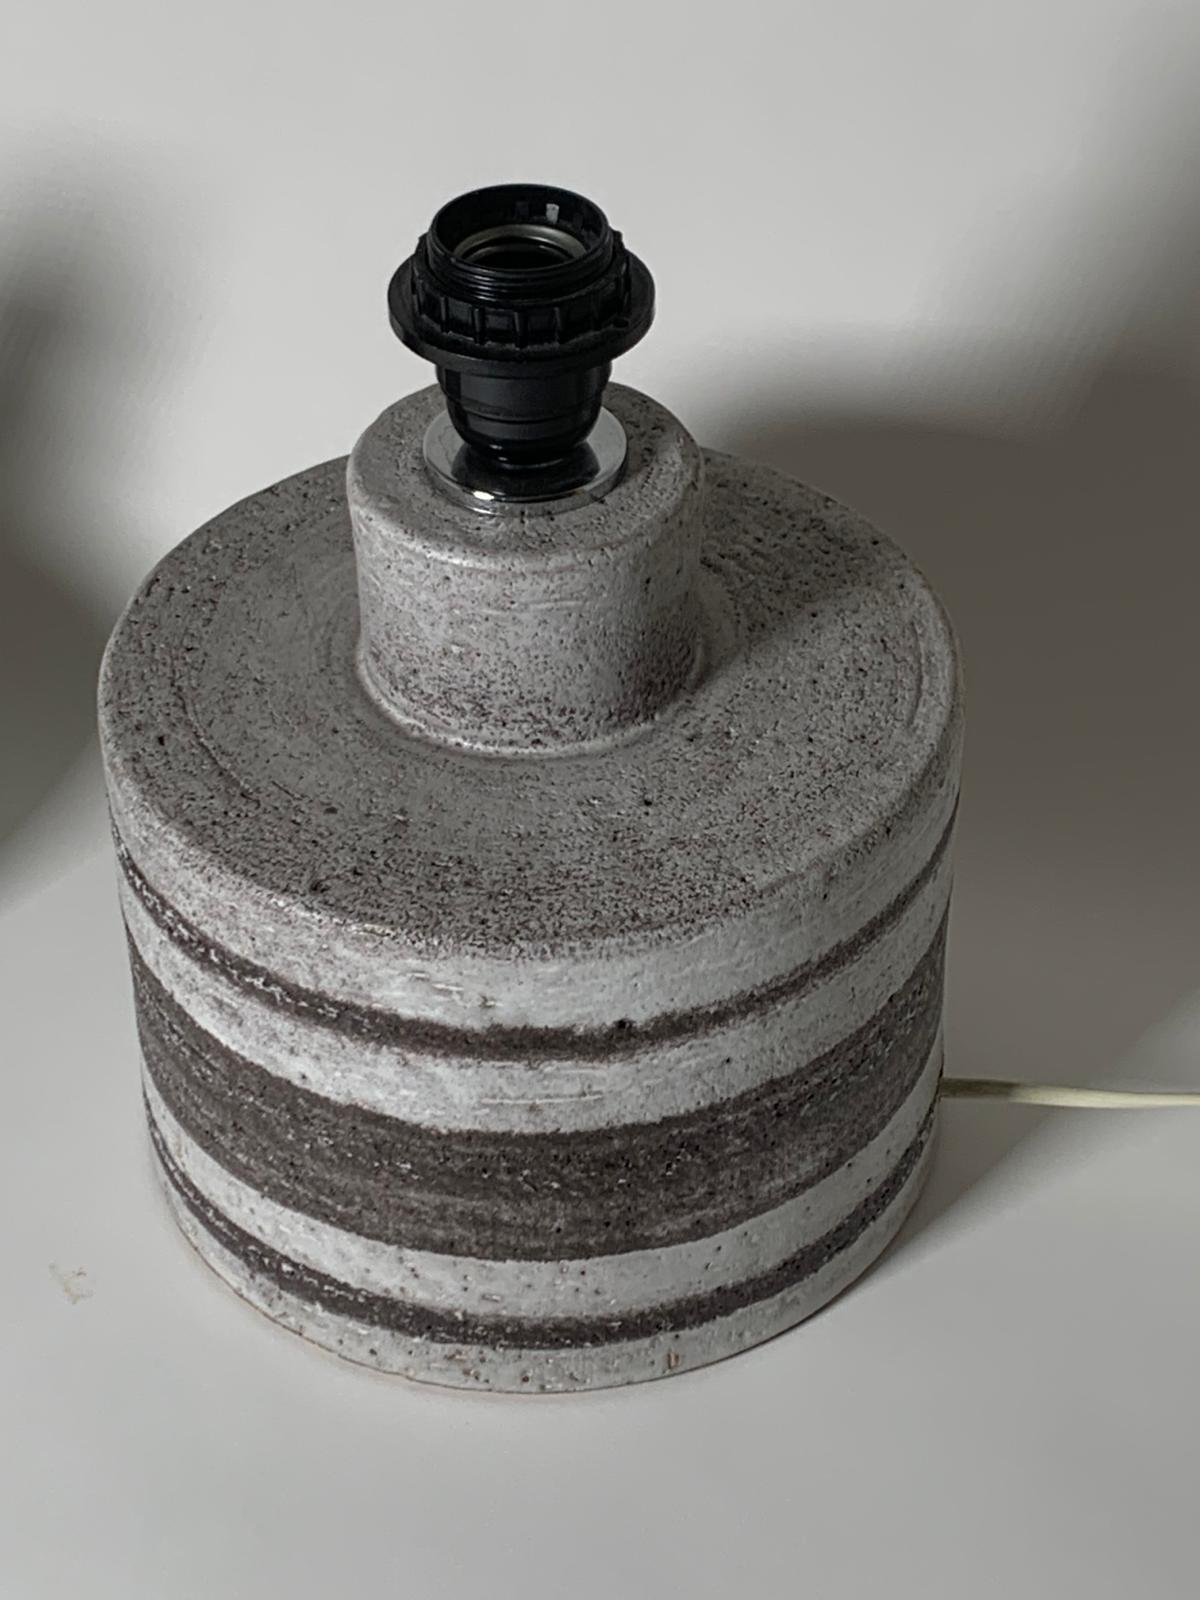 Two Gres lamp bases from the 1960s
Small base dimensions H 20 cm x Diameter 15 cm.

About Gres
Hard-paste ceramic material, compact, sonorous, waterproof, obtained by firing until the mixture incipiently vitrifies; it is often also covered with a